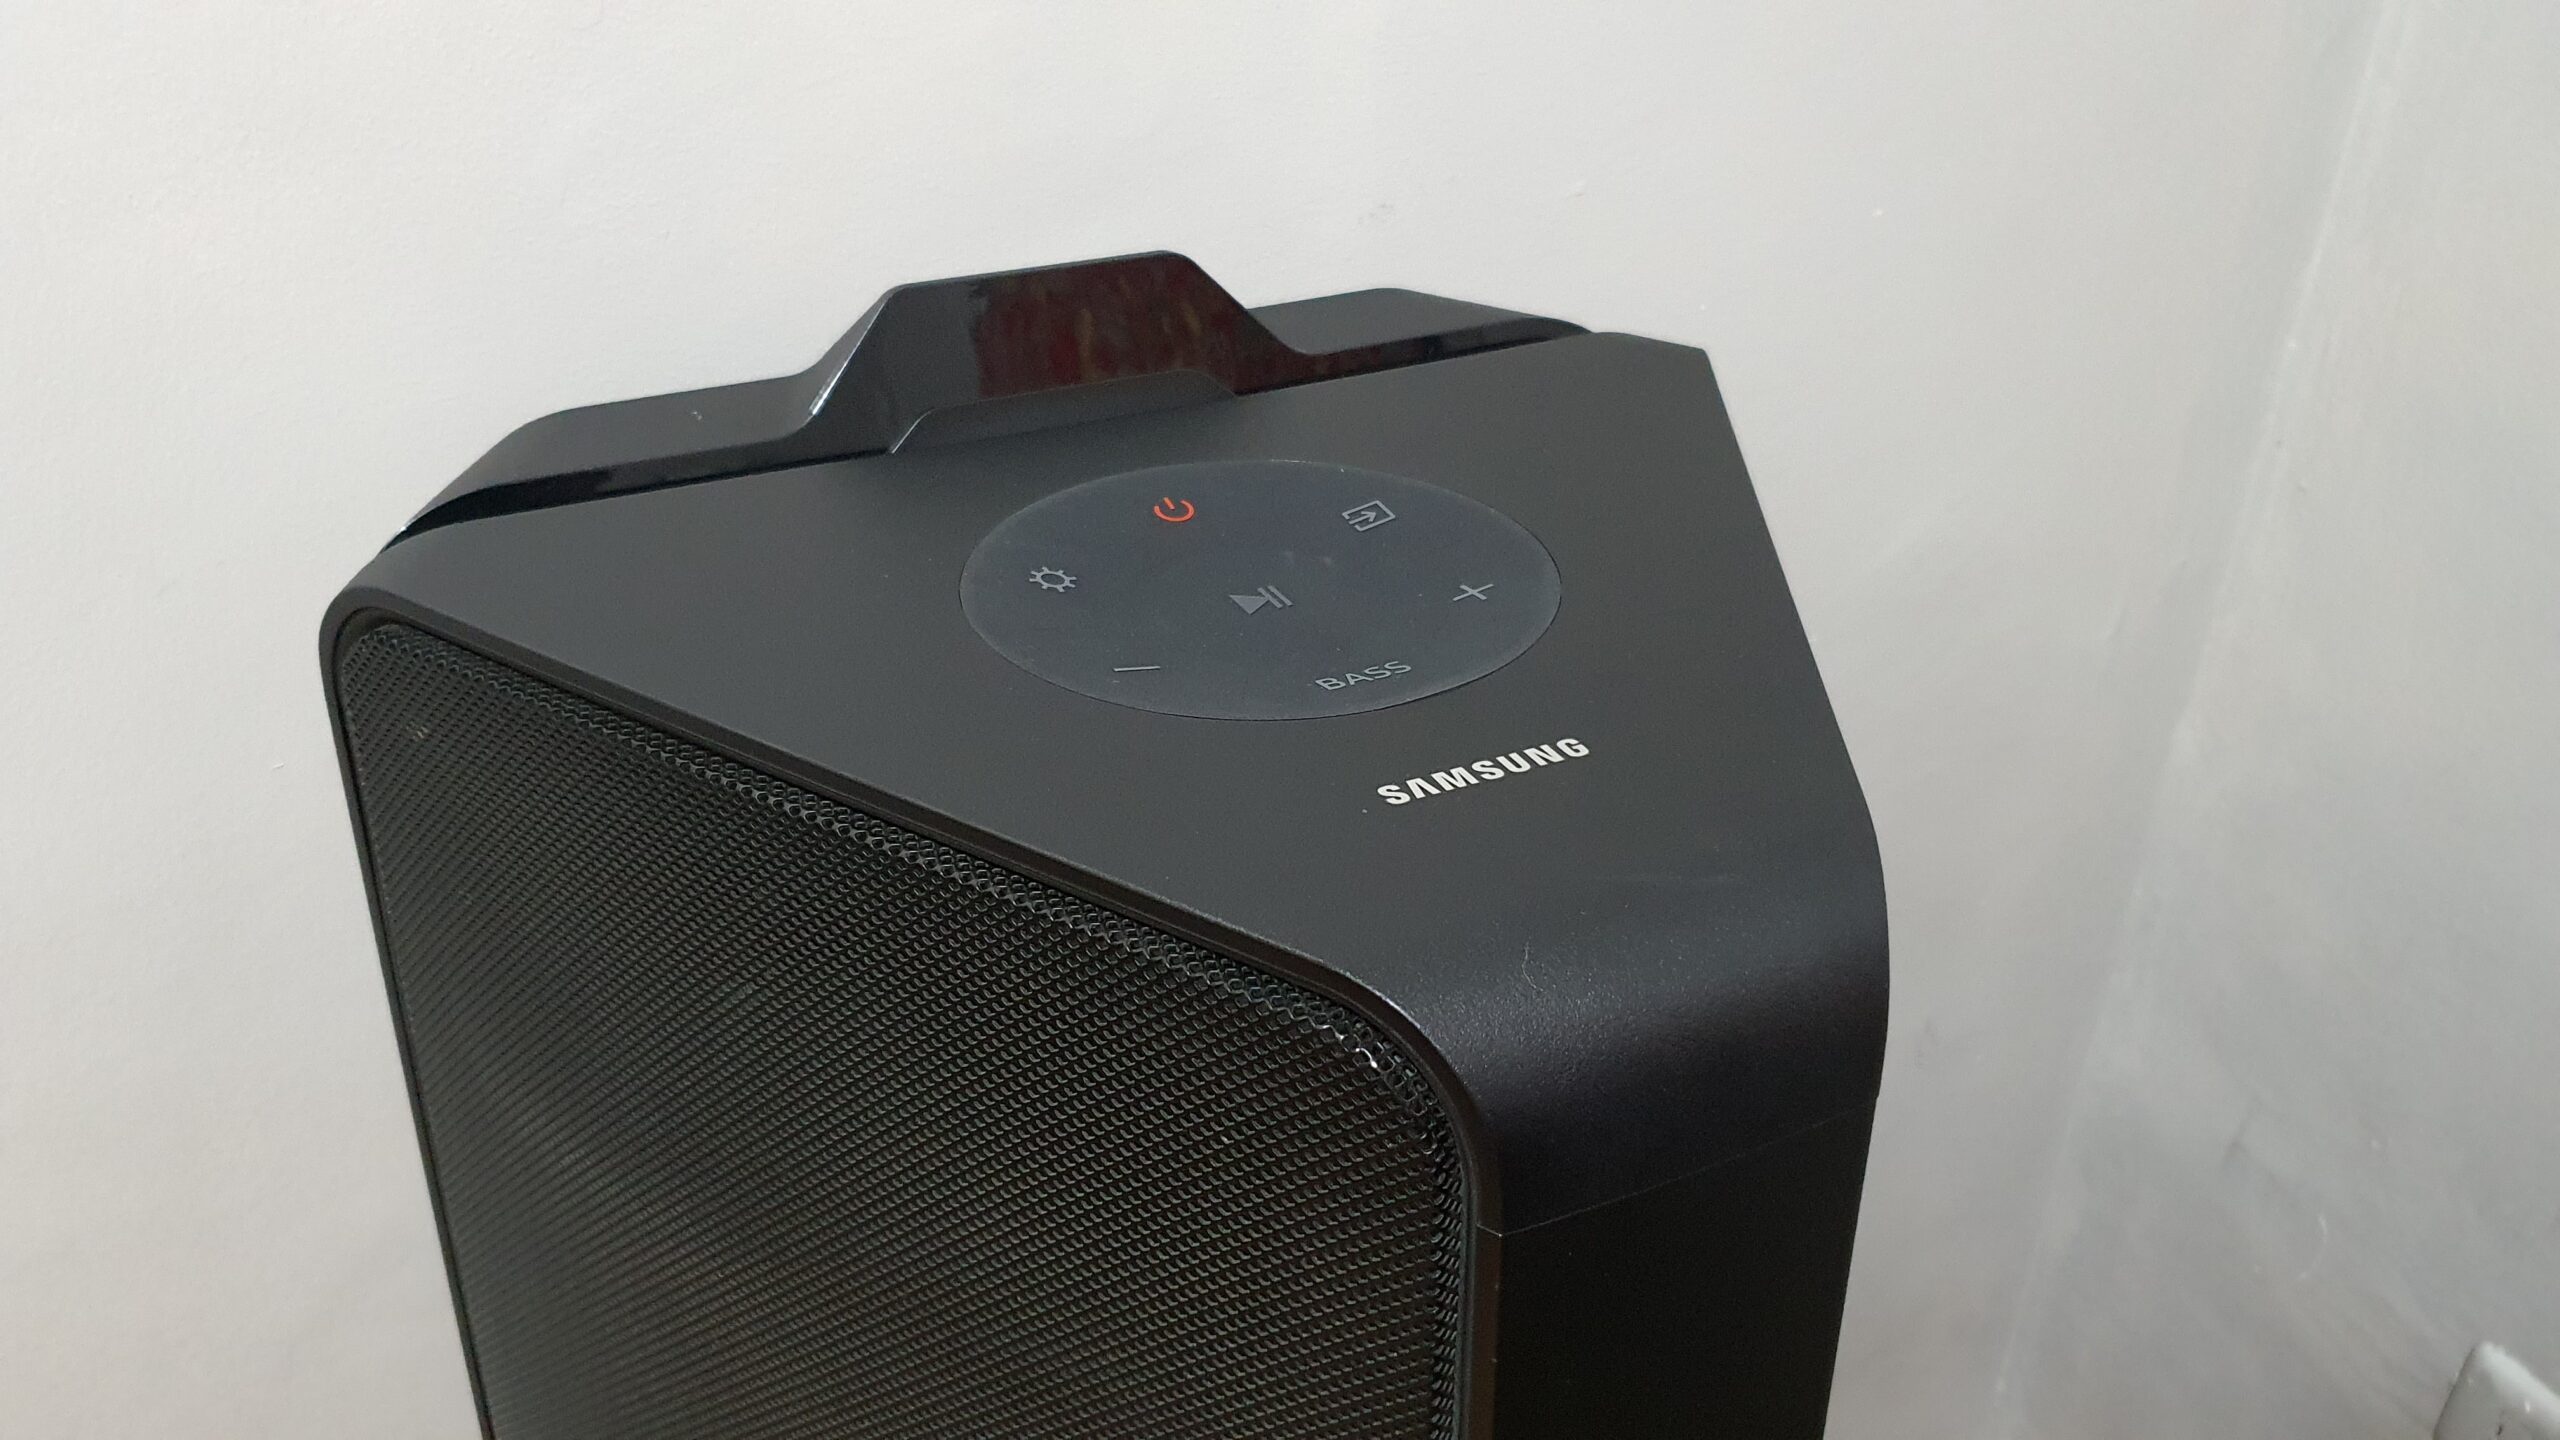 Samsung MX-T70 speakers impressions: Good for house parties